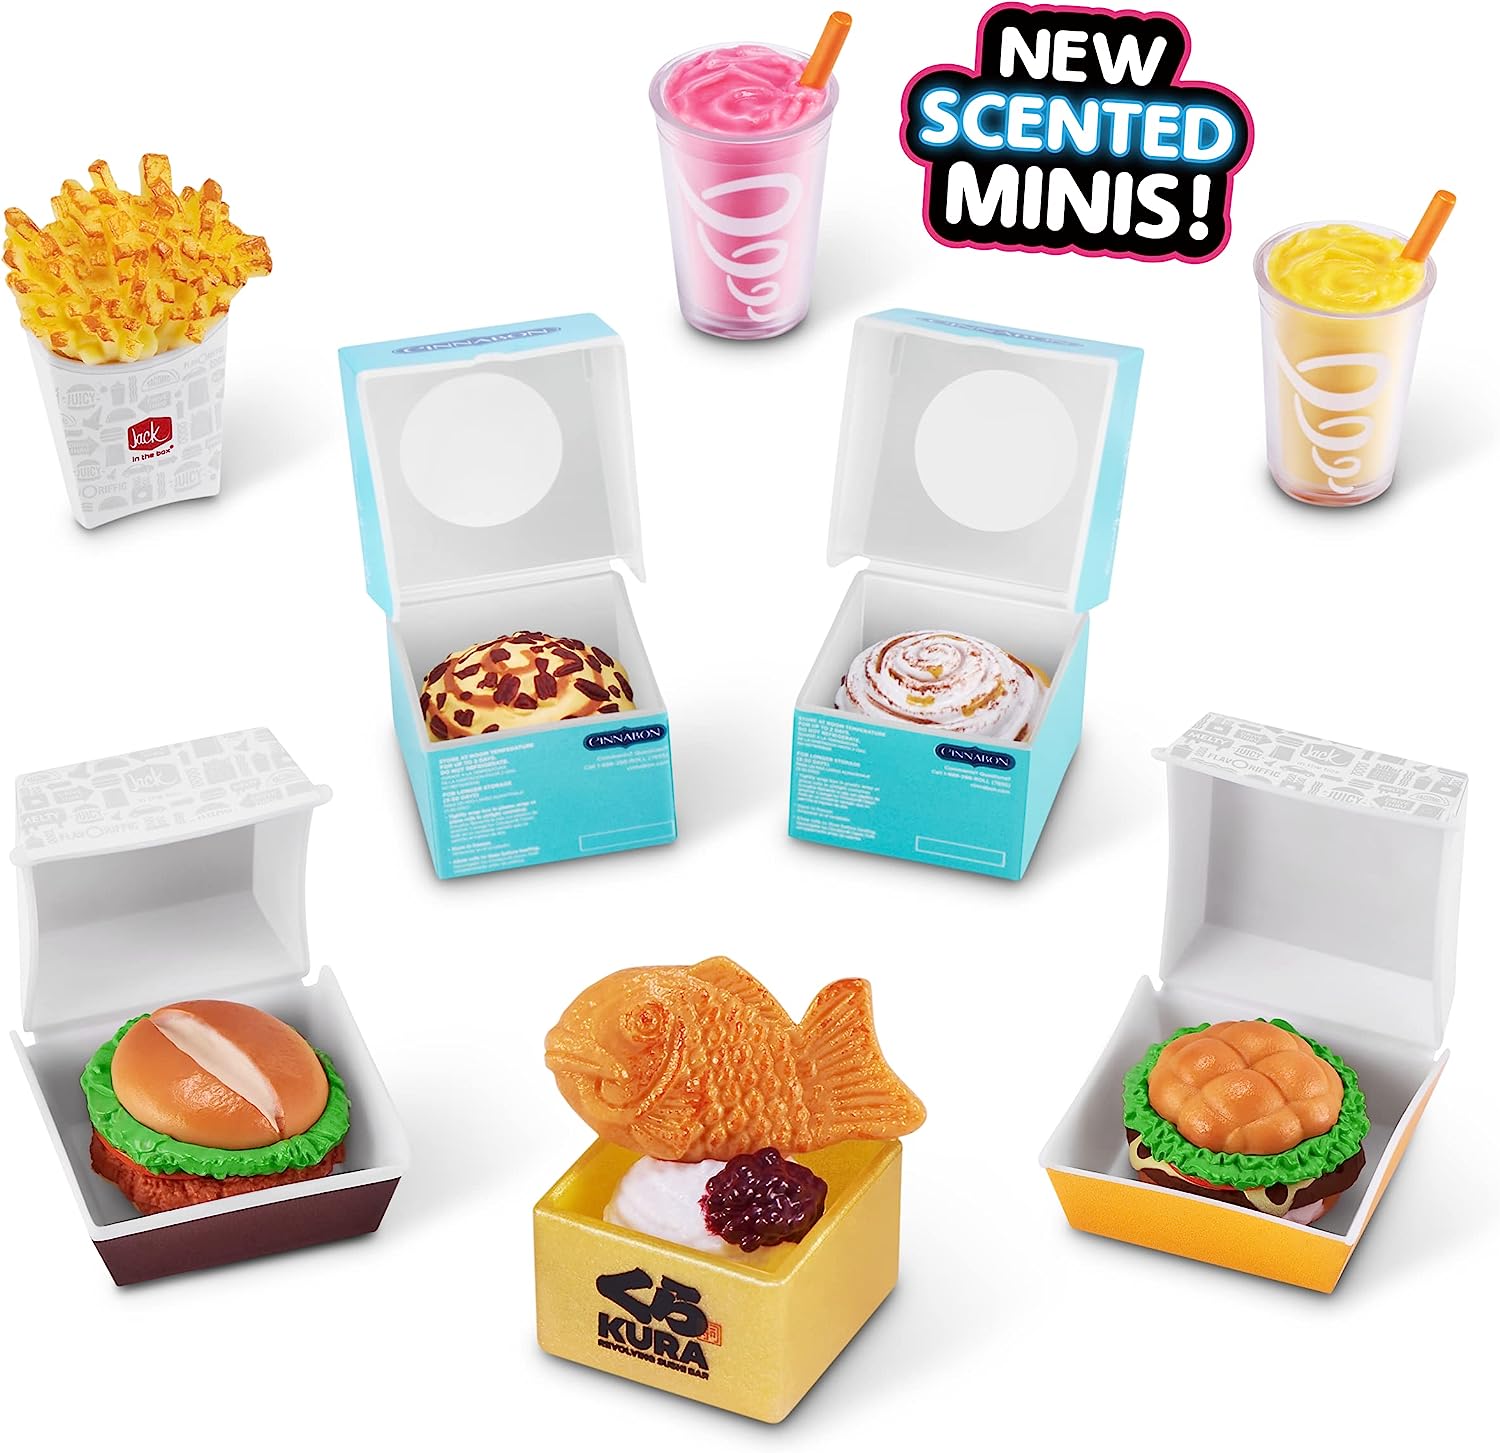 Mini Brands Foodie Series 2 Food Court Playset with 1 Exclusive Mini by  ZURU - Includes Real Mini Fast Food Brands Collectibles, Food Court Playset